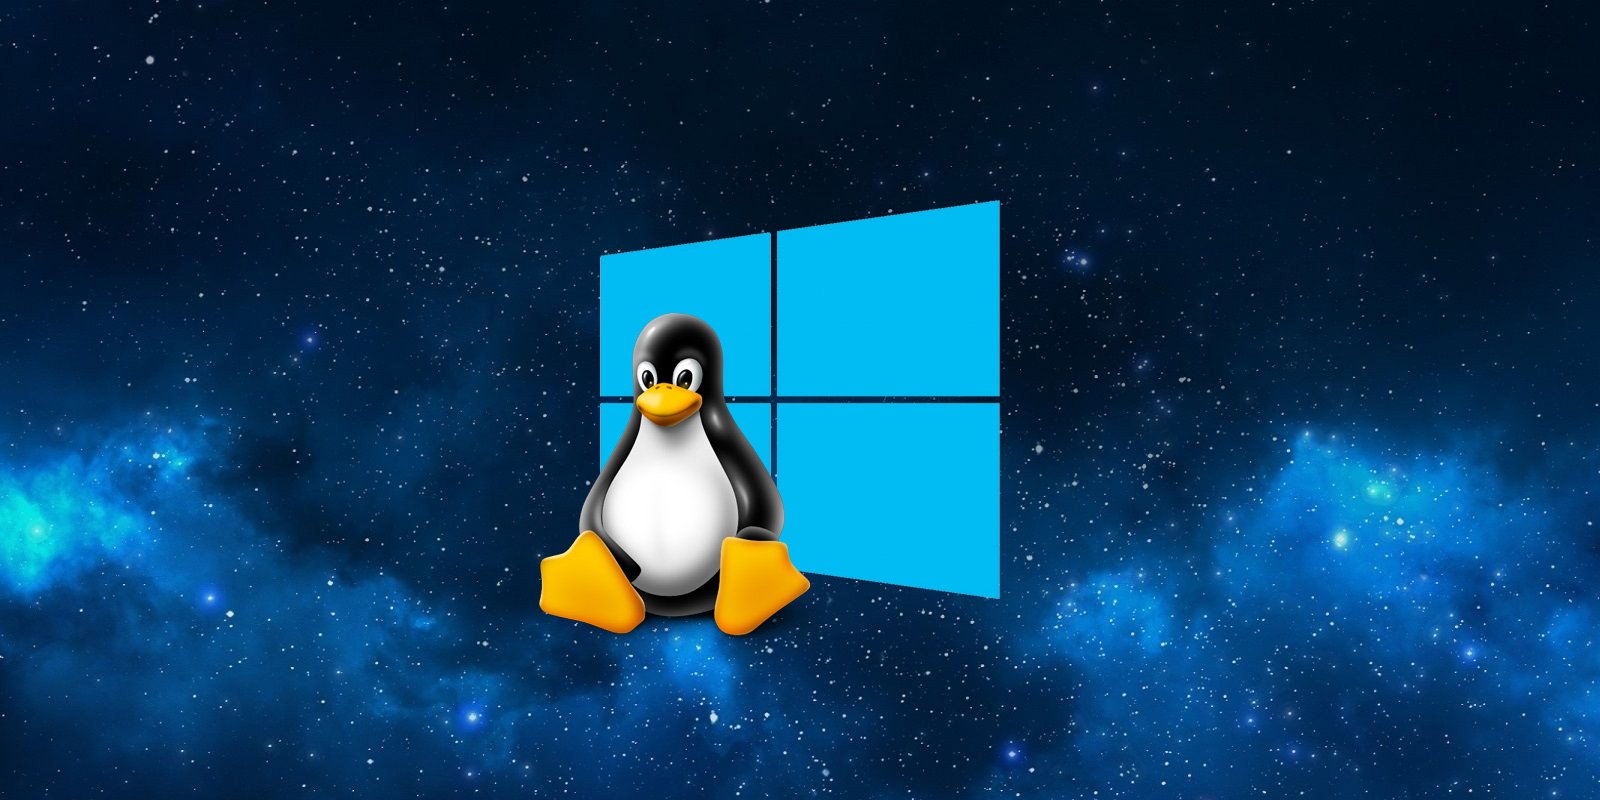 Microsoft has released Windows Subsystem for Linux (WSL) 2.0.0 with a set of new opt-in experimental features, including a new network mode and automa